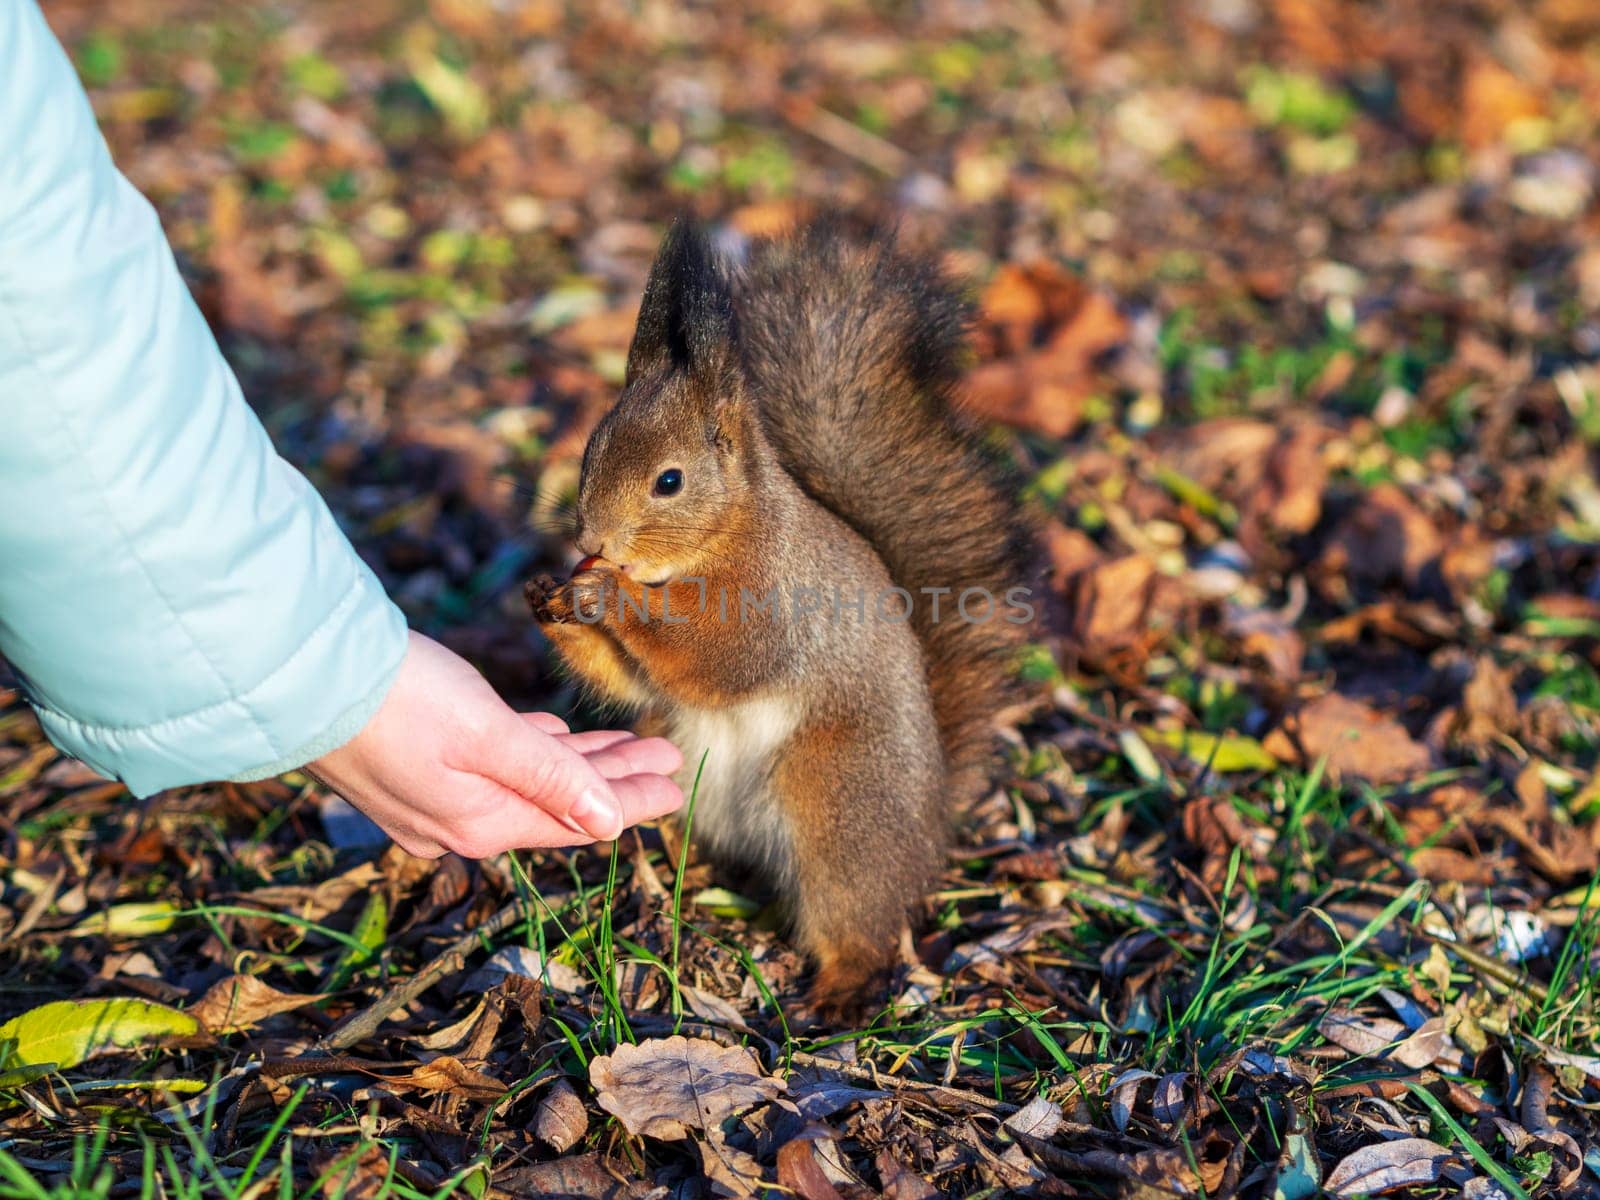 Winter squirrel eats a nut from a female hand. Eurasian red squirrel, Sciurus vulgaris by Andre1ns